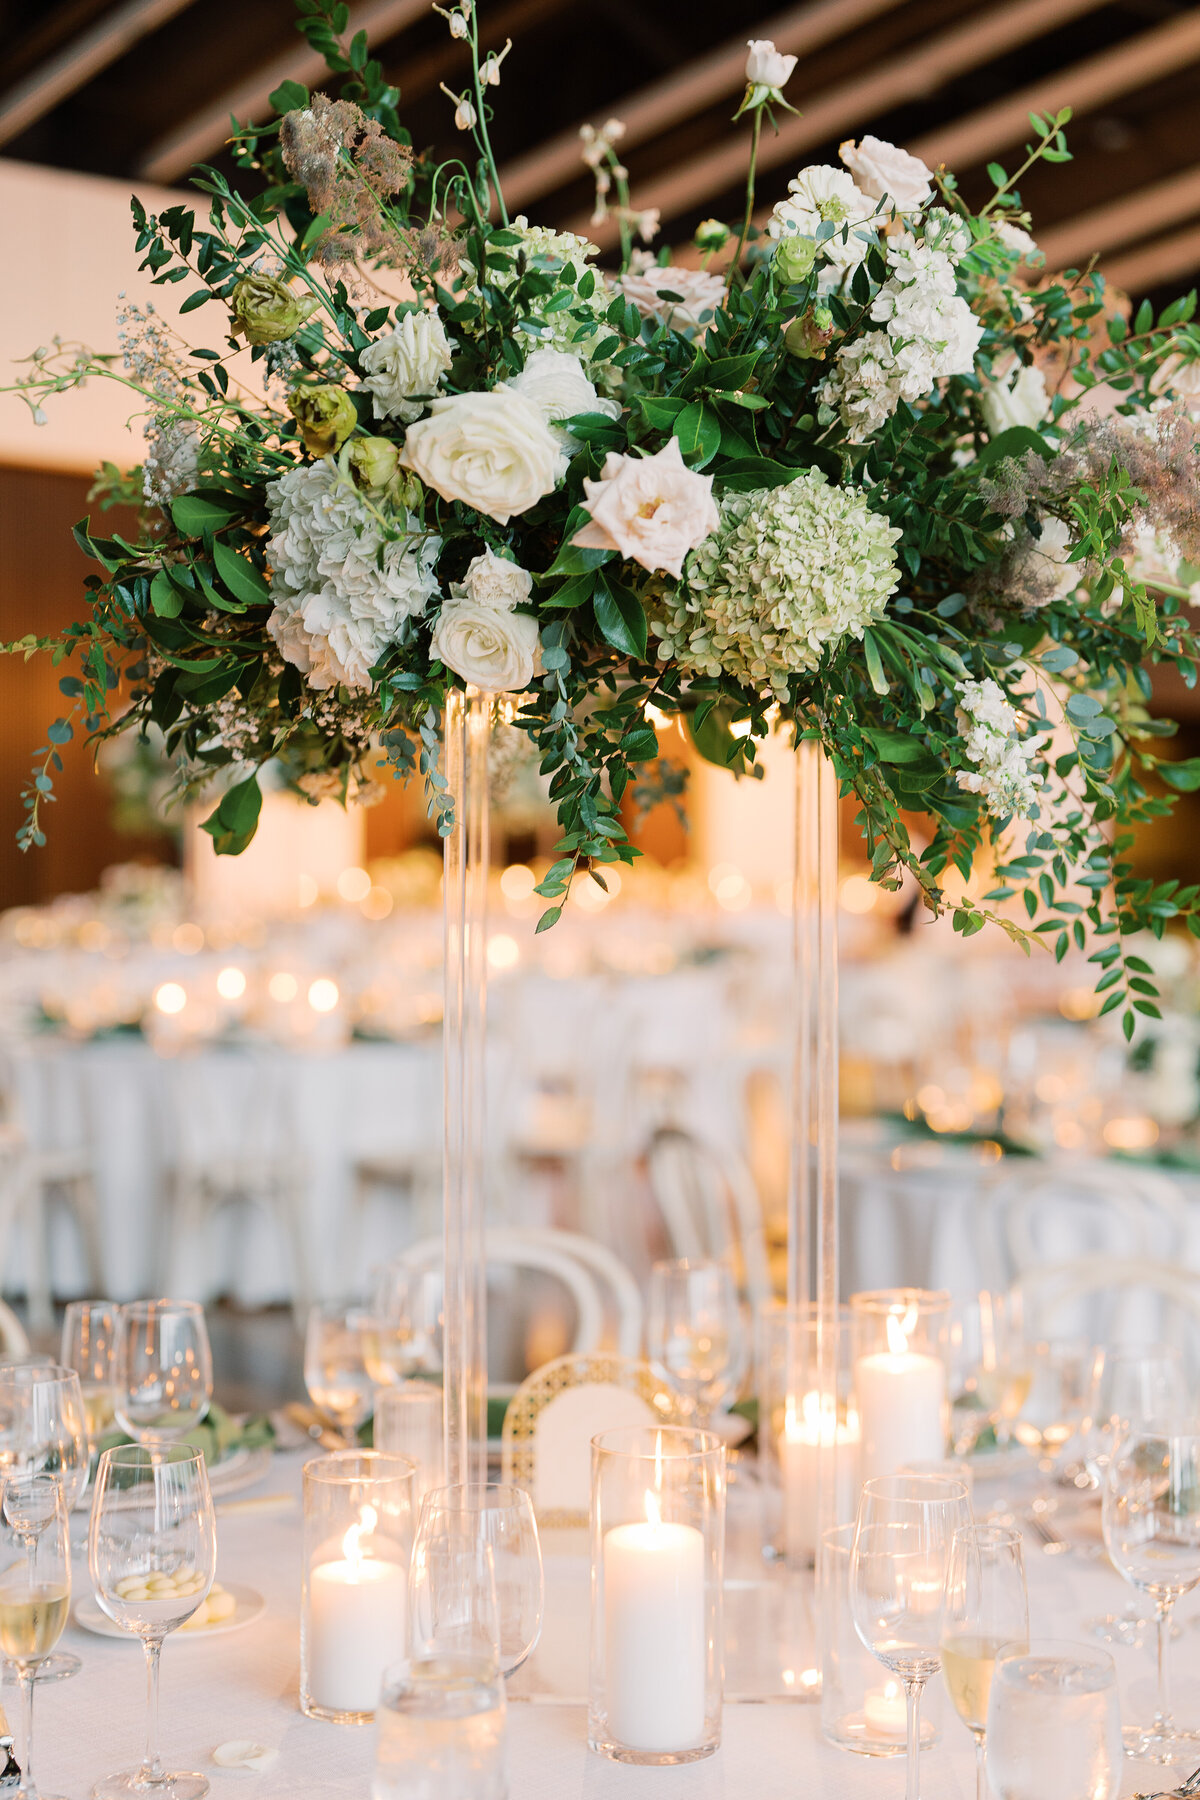 Elevated floral centerpieces for garden-inspired wedding in downtown Nashville. Classic white and green wedding with floral colors in cream, white, taupe, and champagne. Timeless pillar and votive candles in white accent this lush tall floral design. Design by Rosemary & Finch in Nashville, TN.